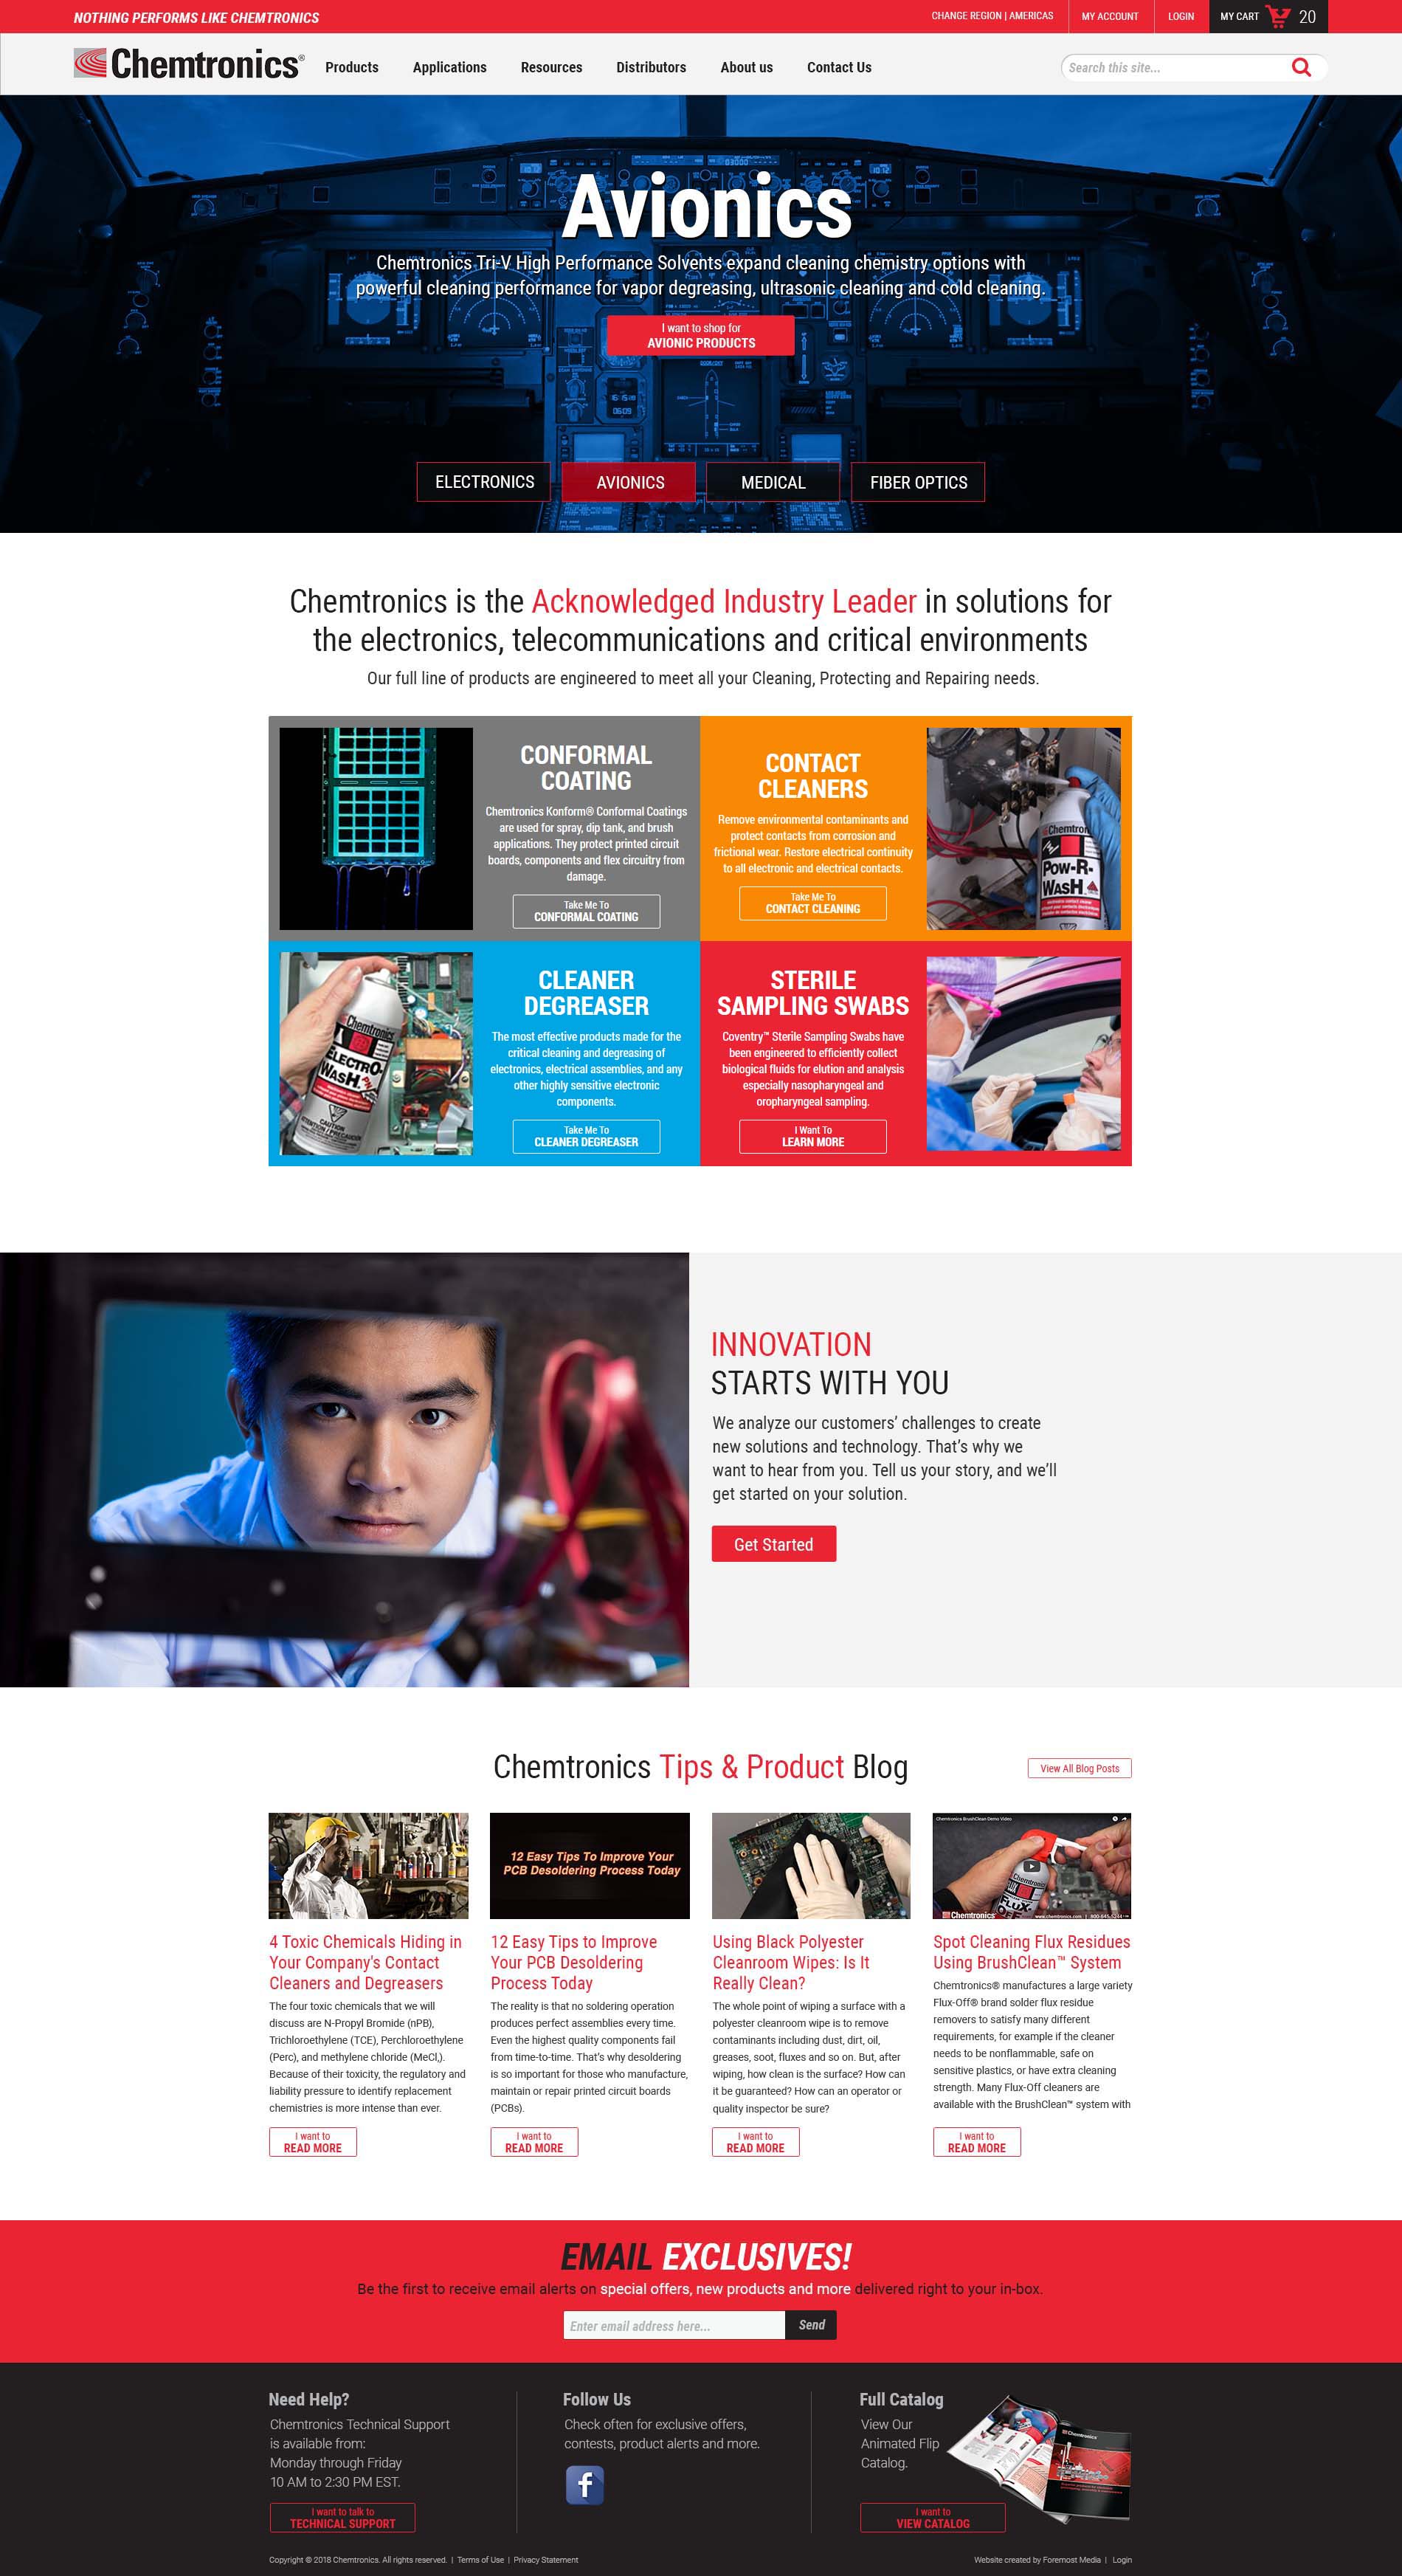 Example of the new and improved nopCommerce website designed by Foremost Media for Chemtronics